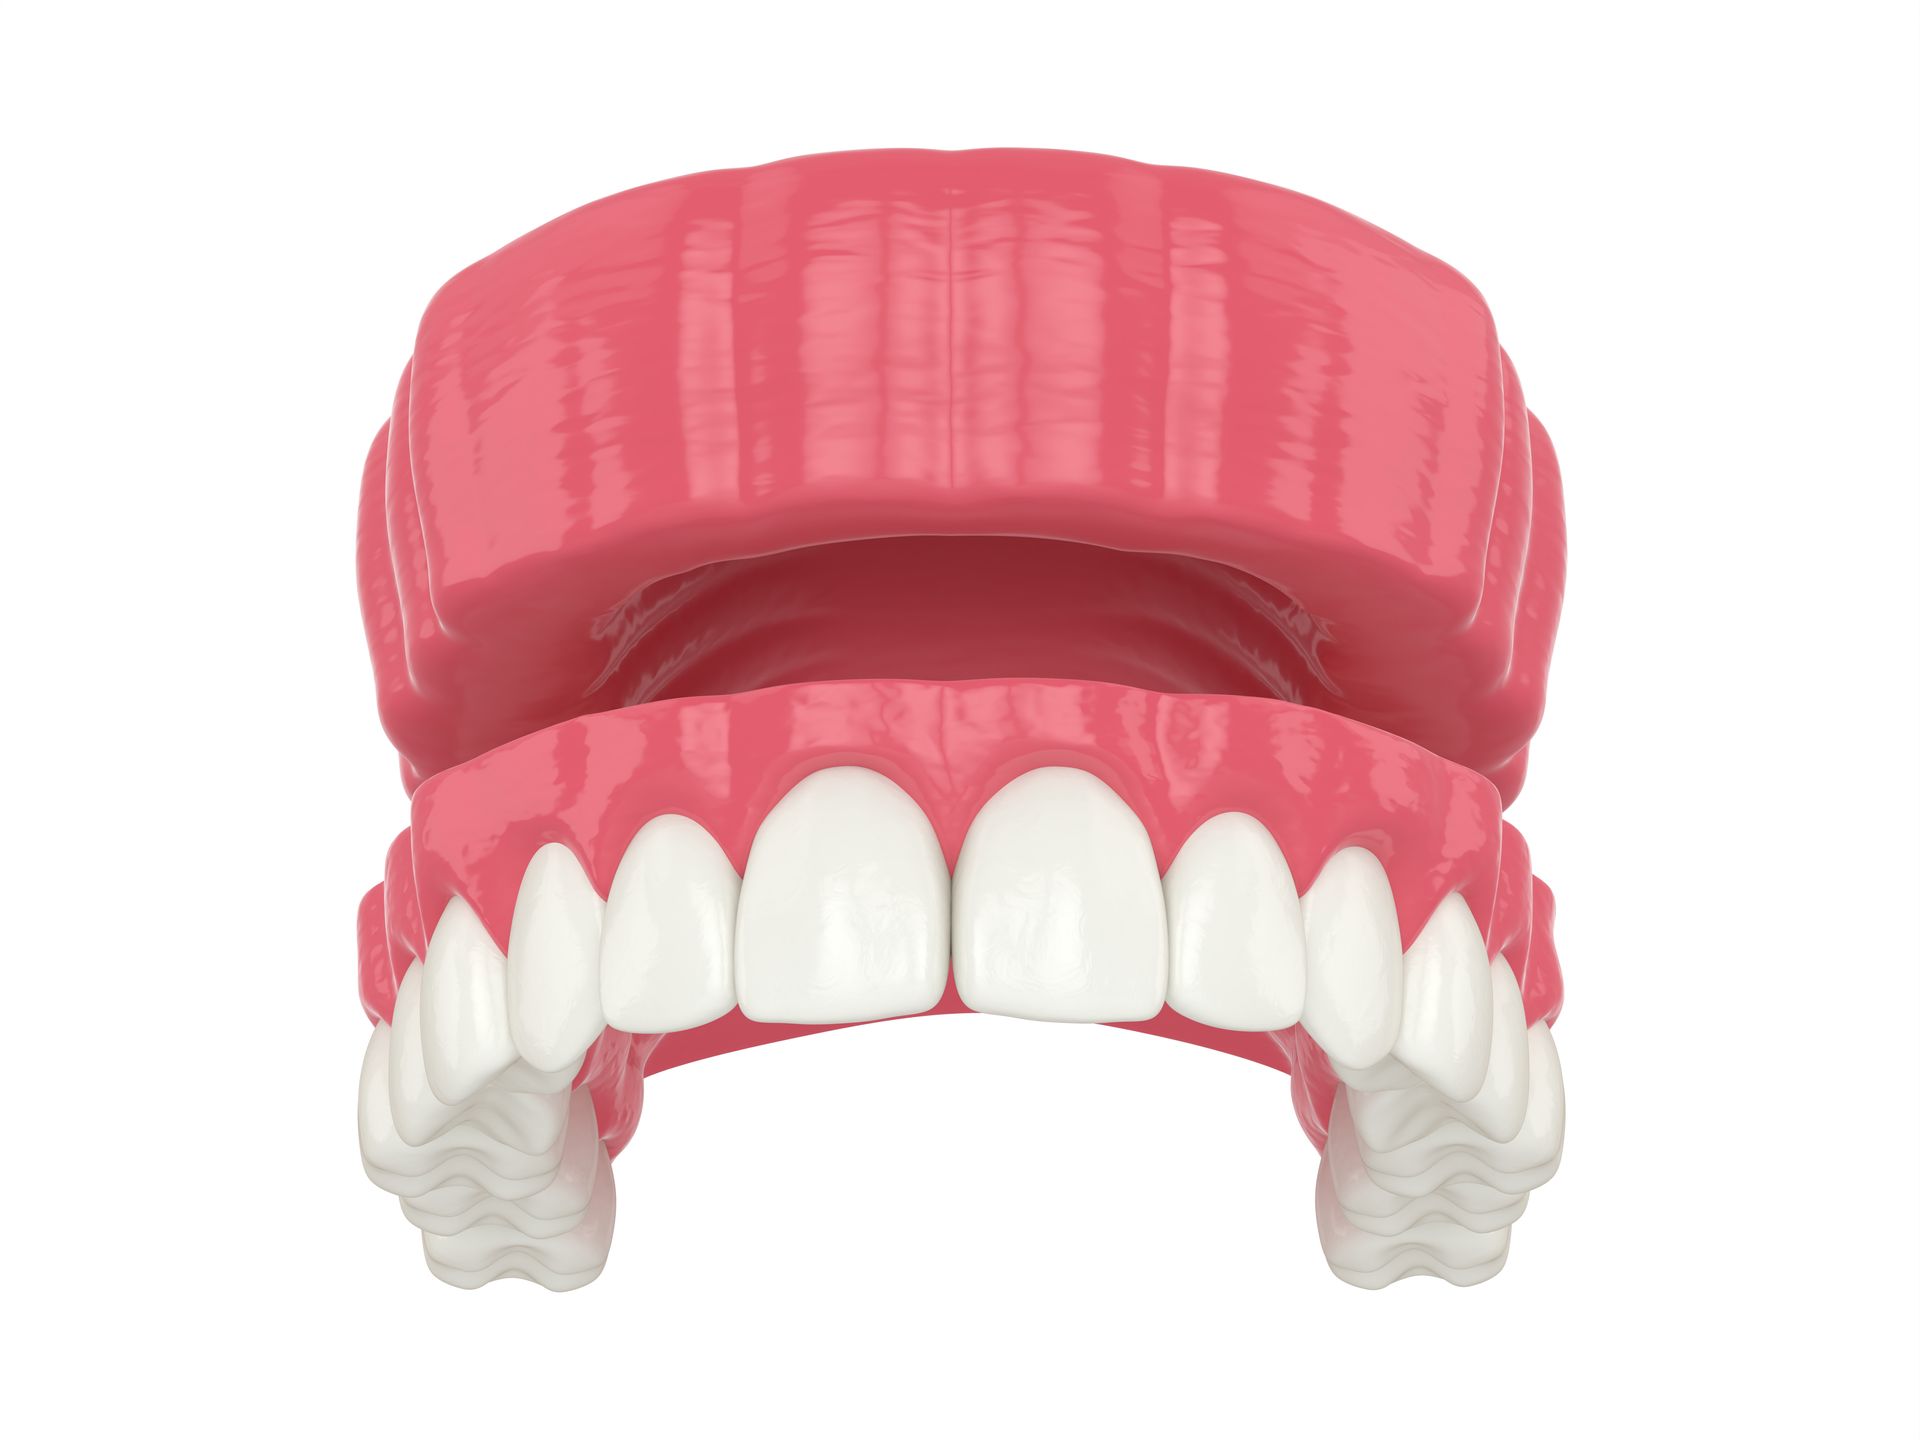 3d image of traditional denture